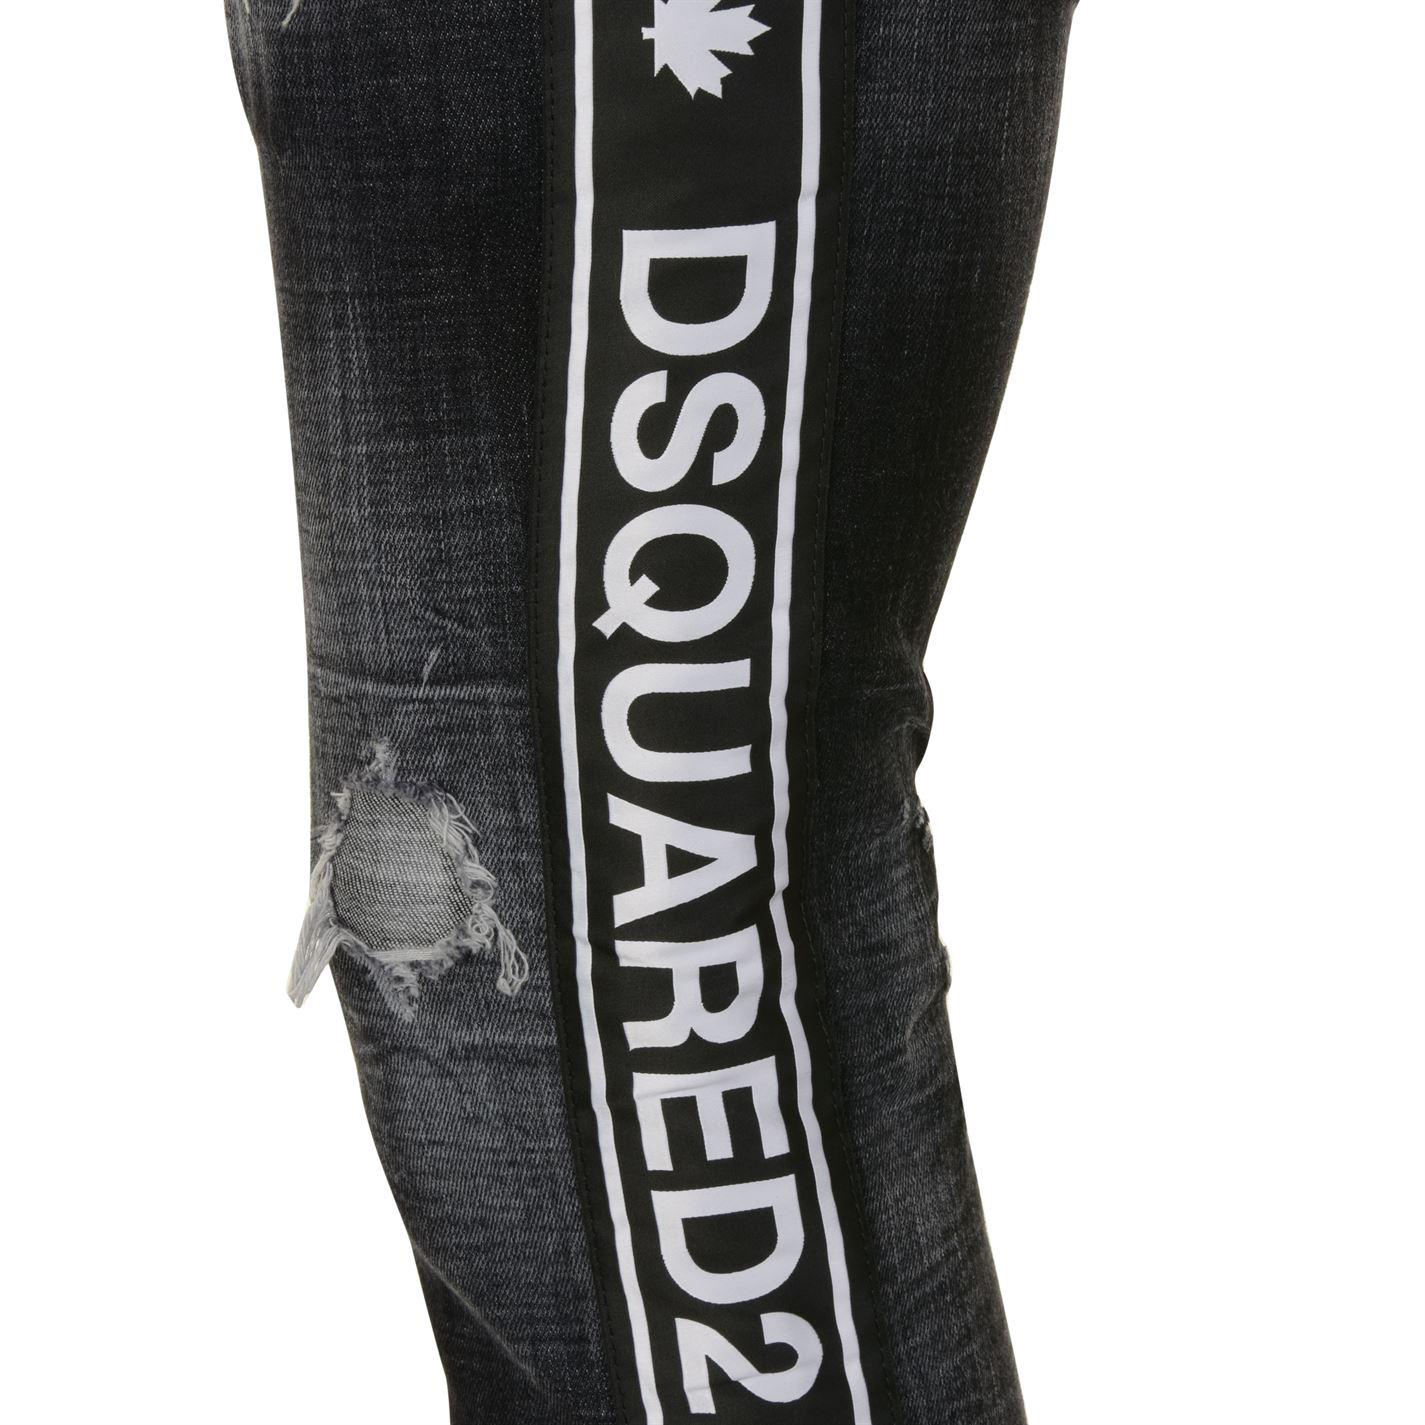 dsquared tape jeans